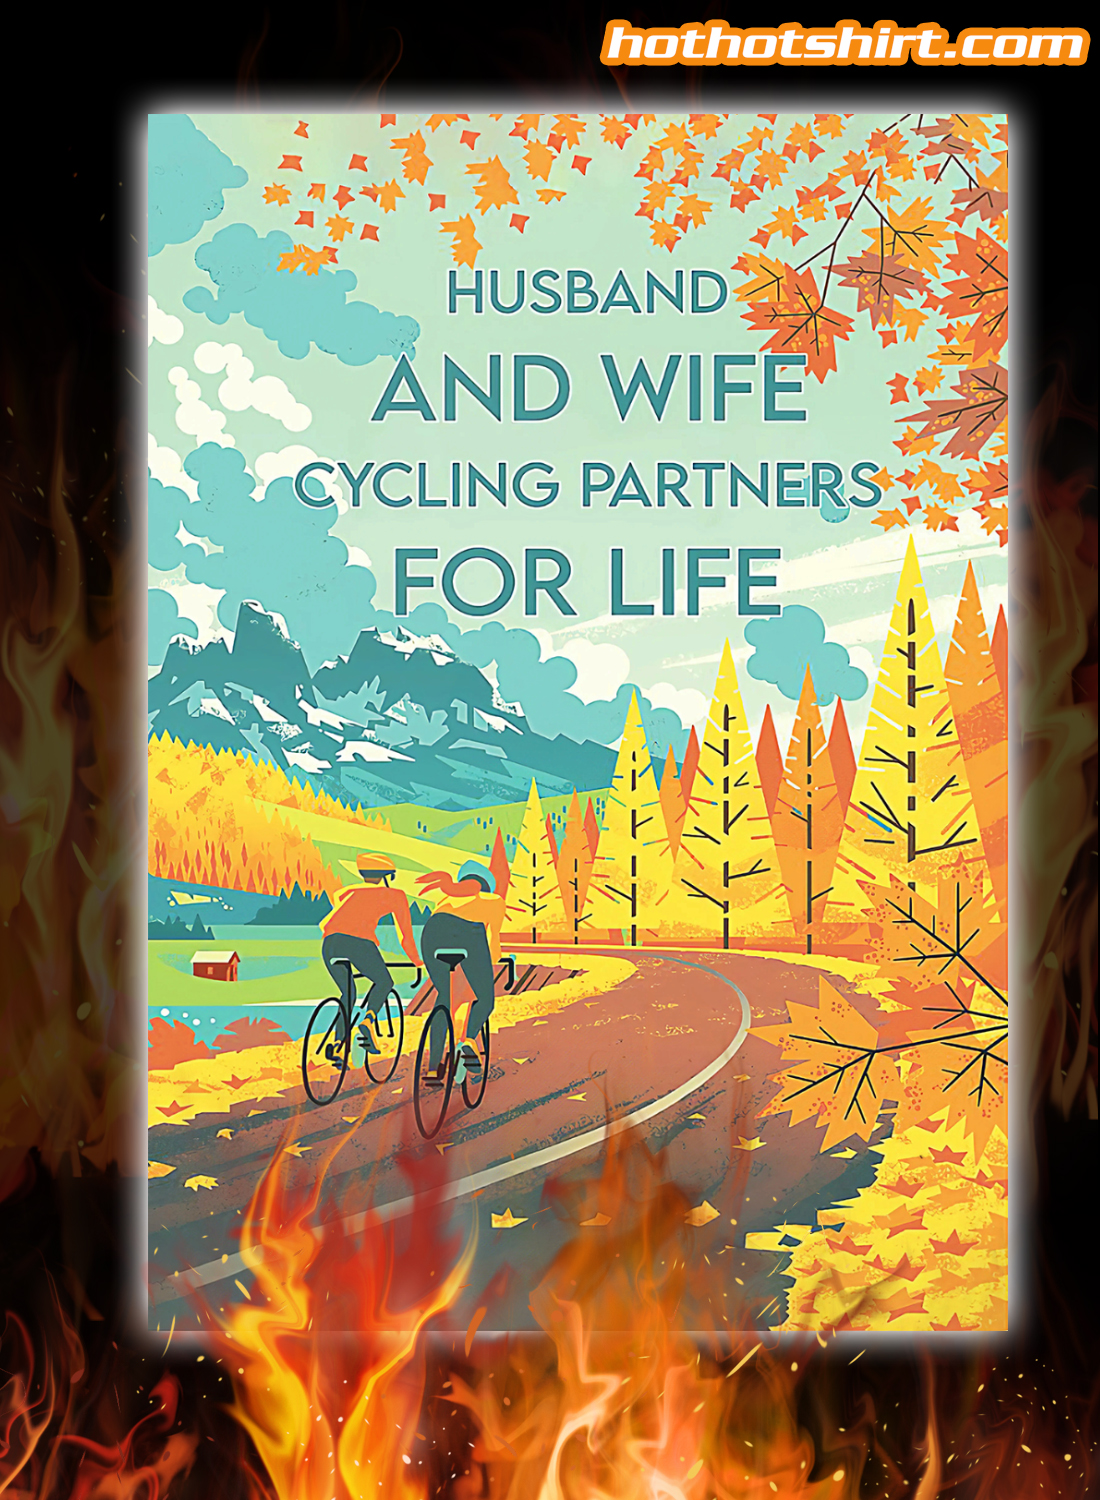 Couple Cycling Husband and Wife cycling partners for life poster